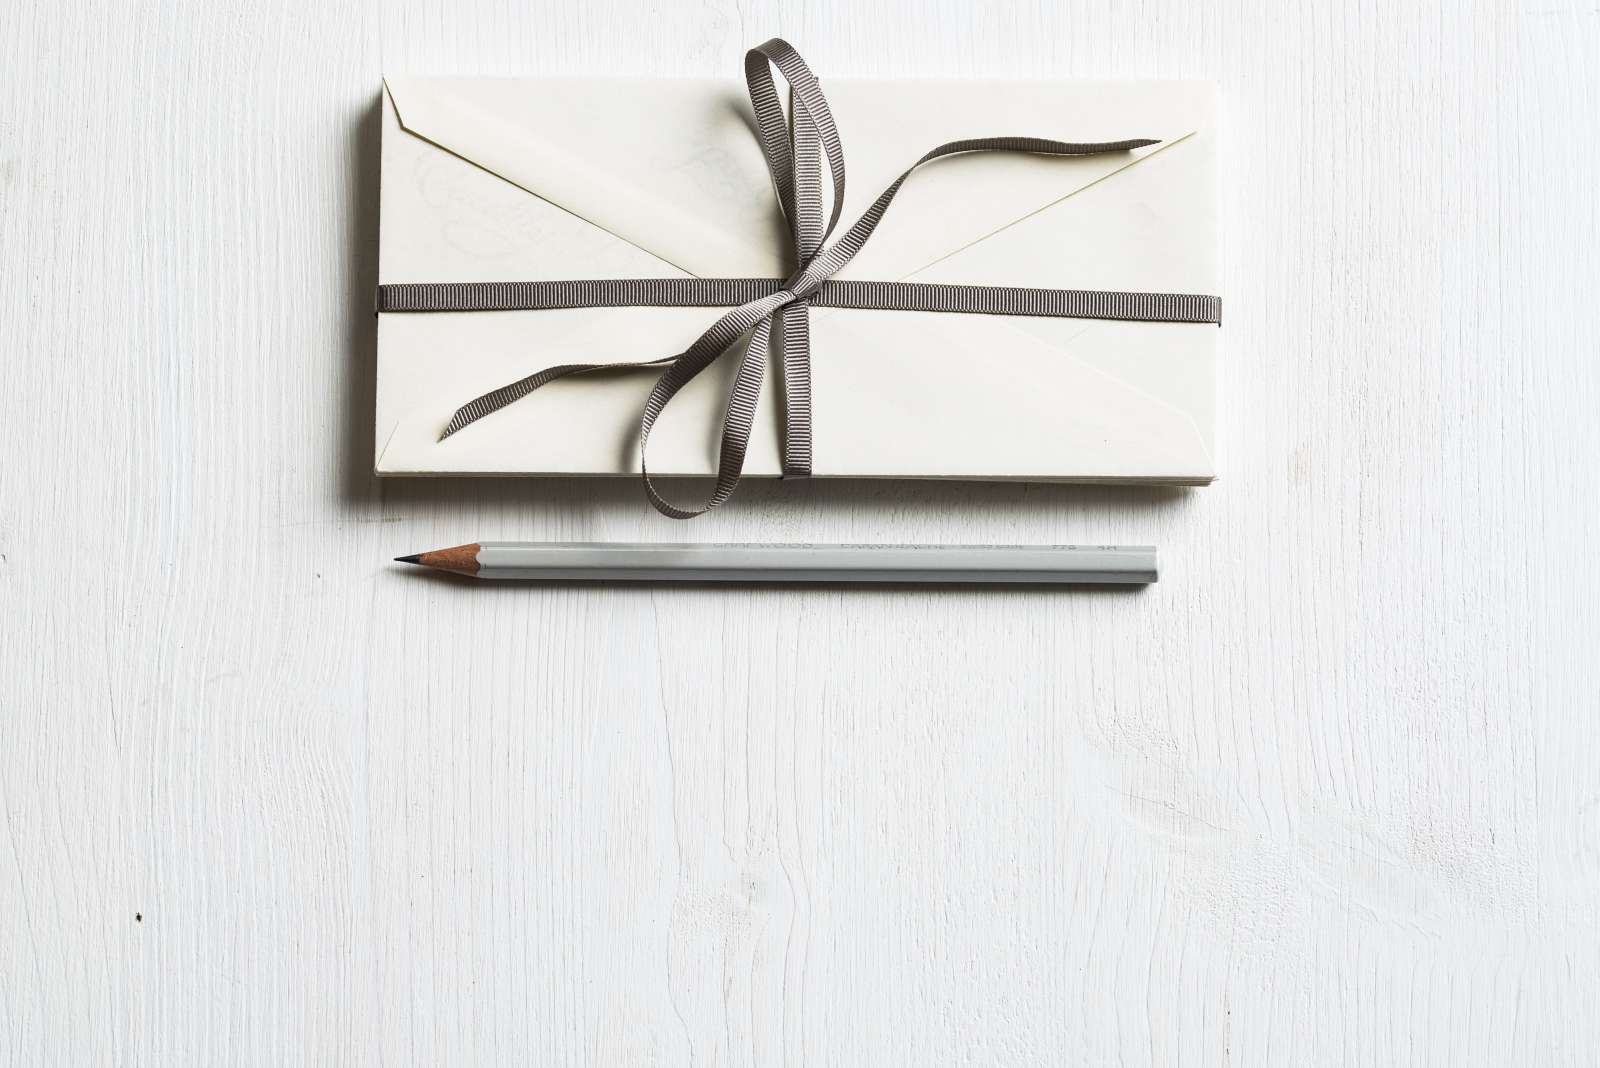 A pencil and letter